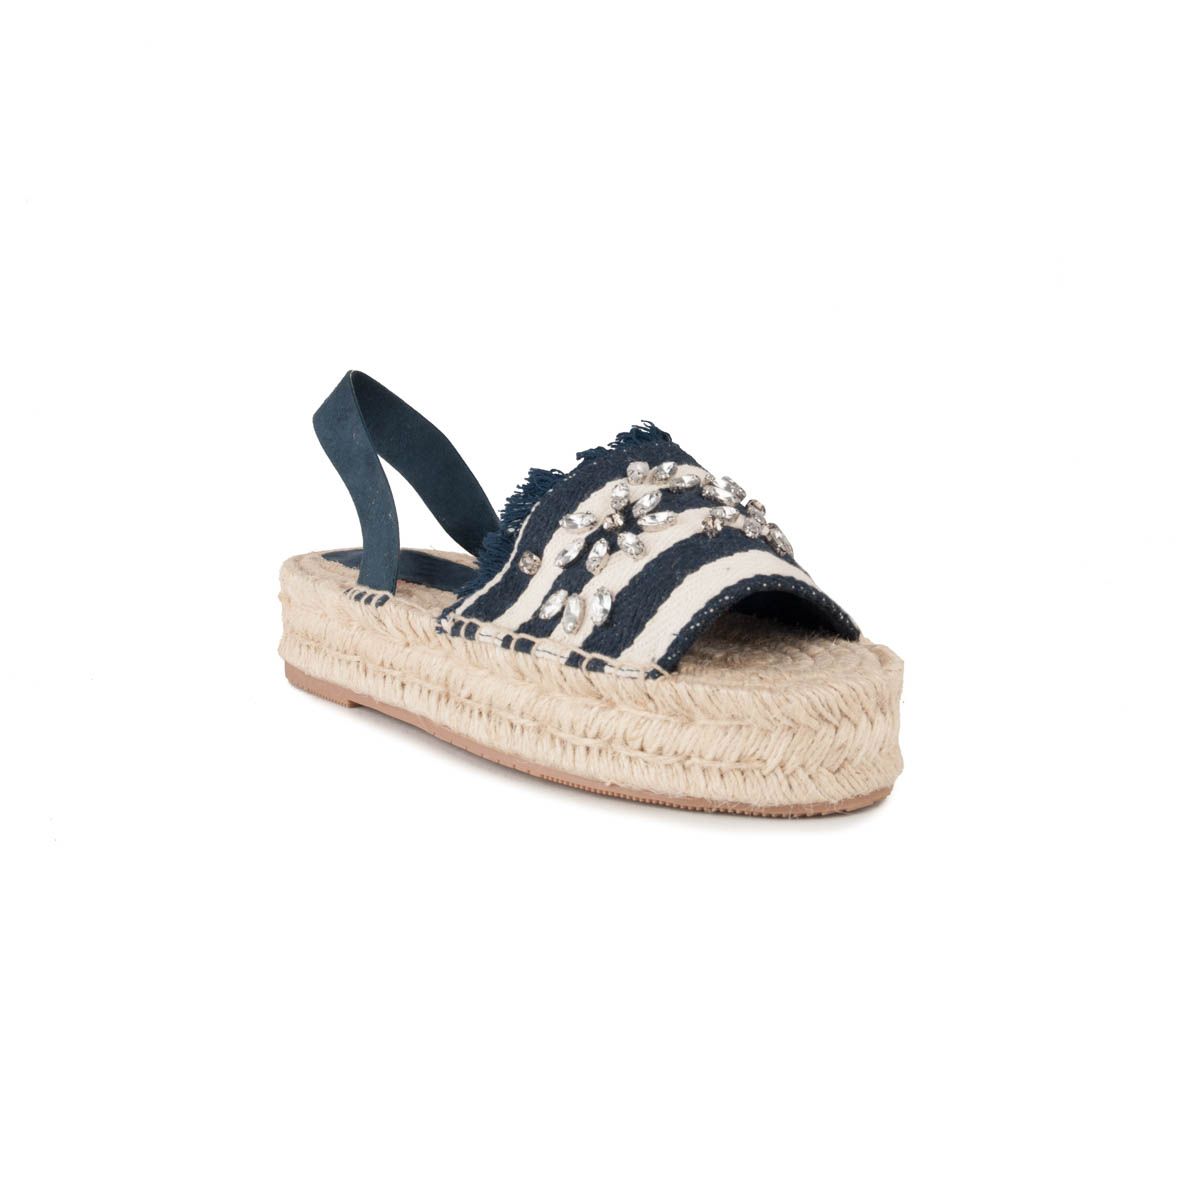 Great for summer thanks to its style and comfort. Unica and different thanks to its traditional Ibizan mix with the touch of platform and small stones. Natural and textile material for greater comfort and freshness in summer. Anti-slip rubber patin that covers the entire esparto sole. 4 cm platform.